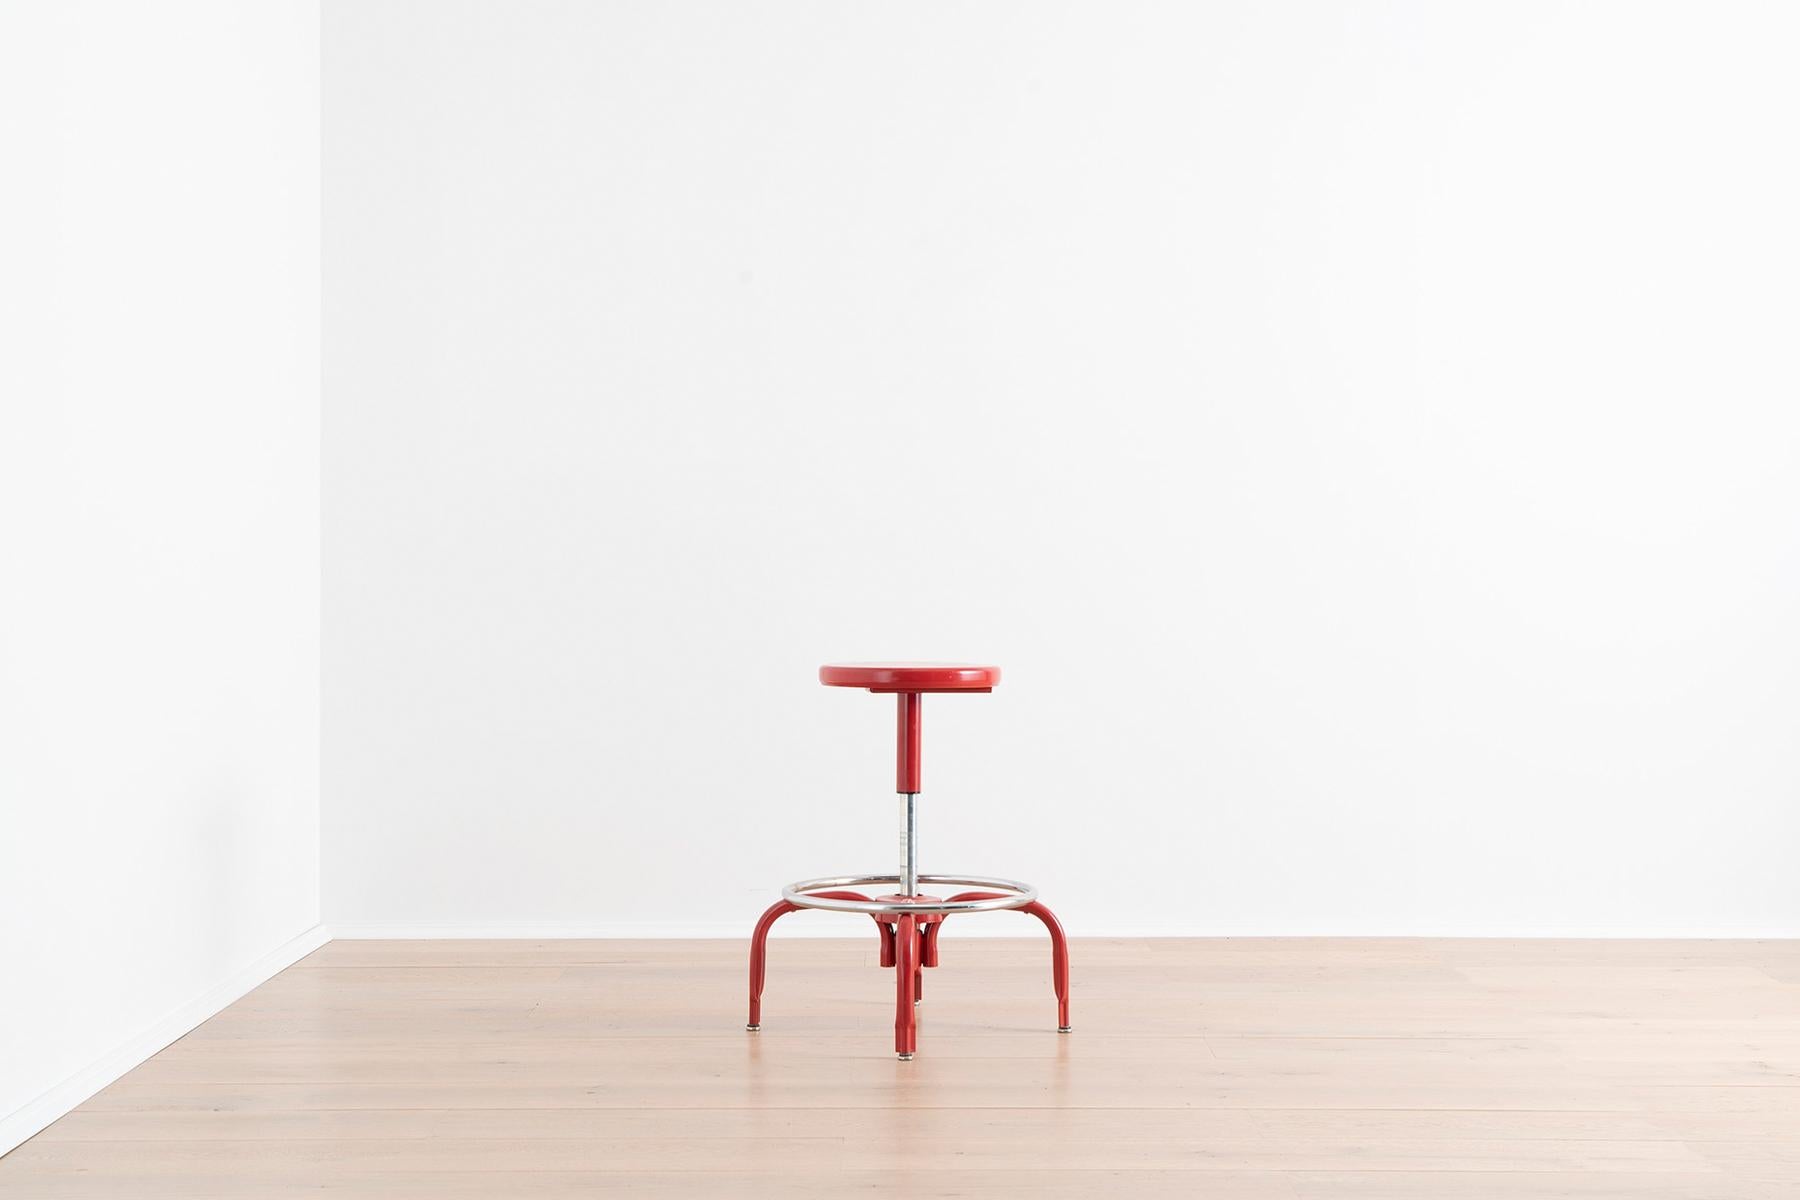 This unpretentious red metal stool is height adjustable originally seated students in the science lab of a girls’ boarding school in Massachusetts circa 1960. We appreciate this piece for its simple, utilitarian design and for the timeless fun of